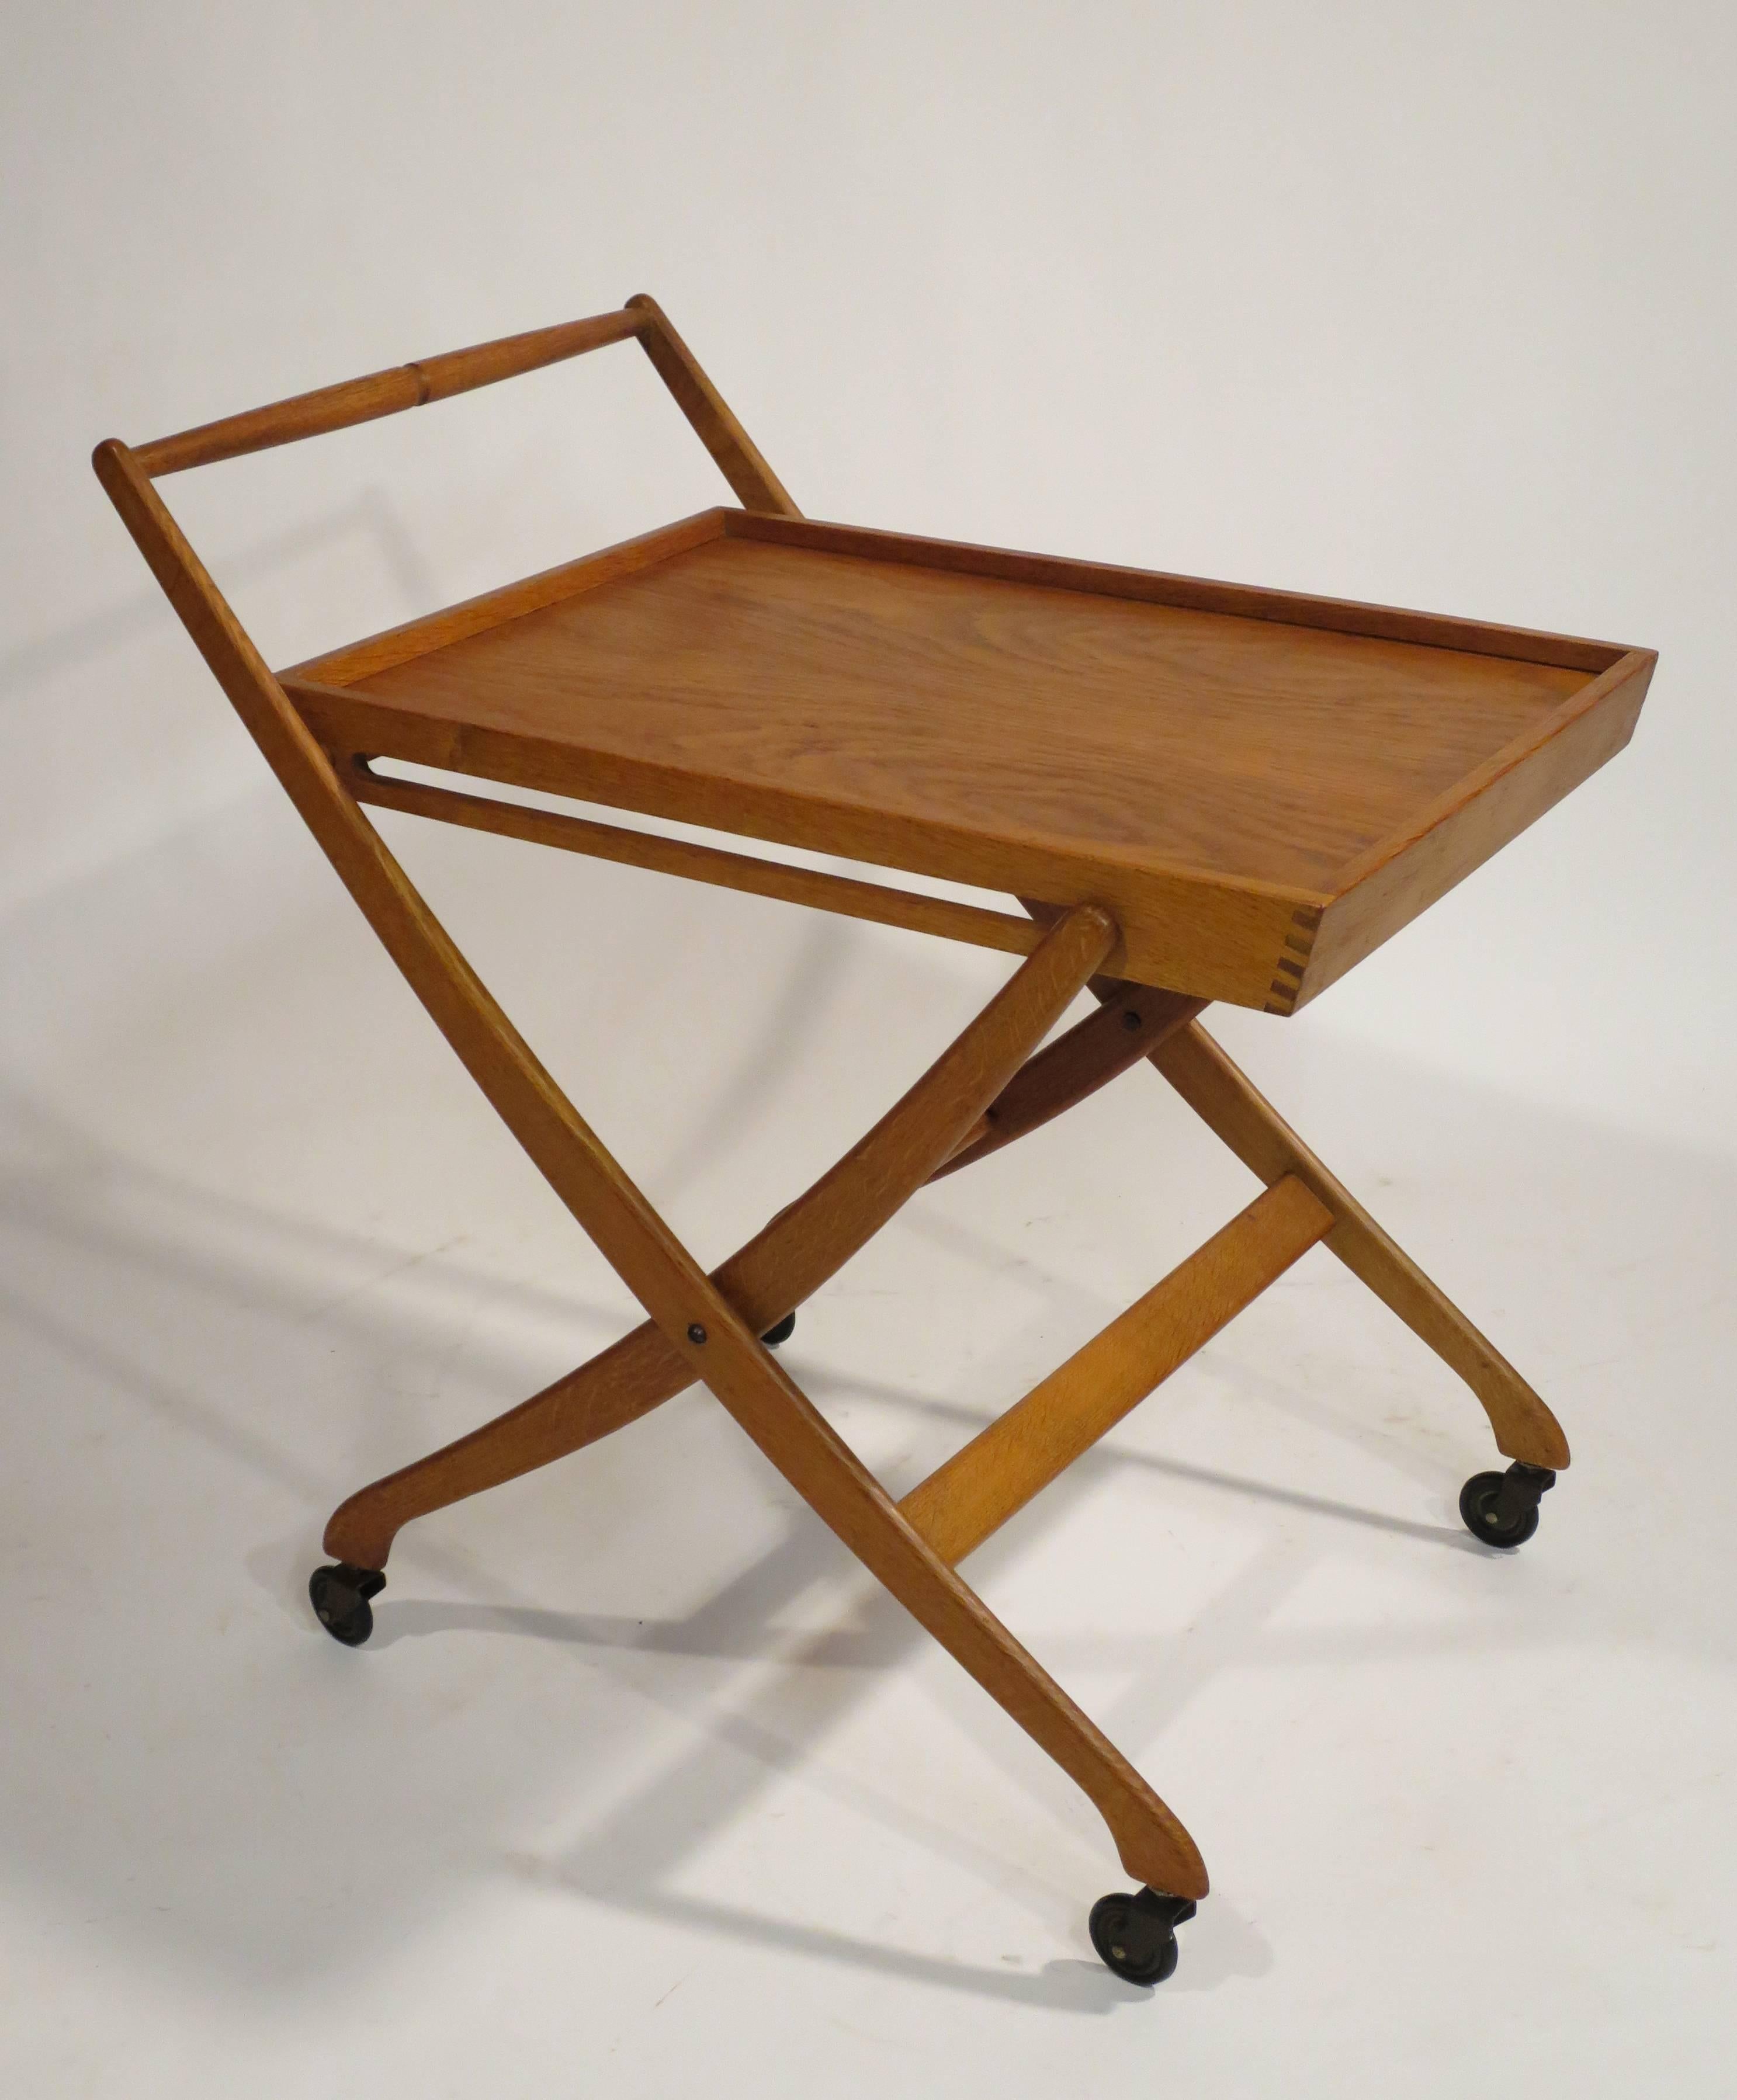 Mid-Century Modern folding bar cart. Solid oak construction with original casters. Folds flat for easy storage, circa 1960s. 
Complimentary shipping in the U.S. (lower 48).